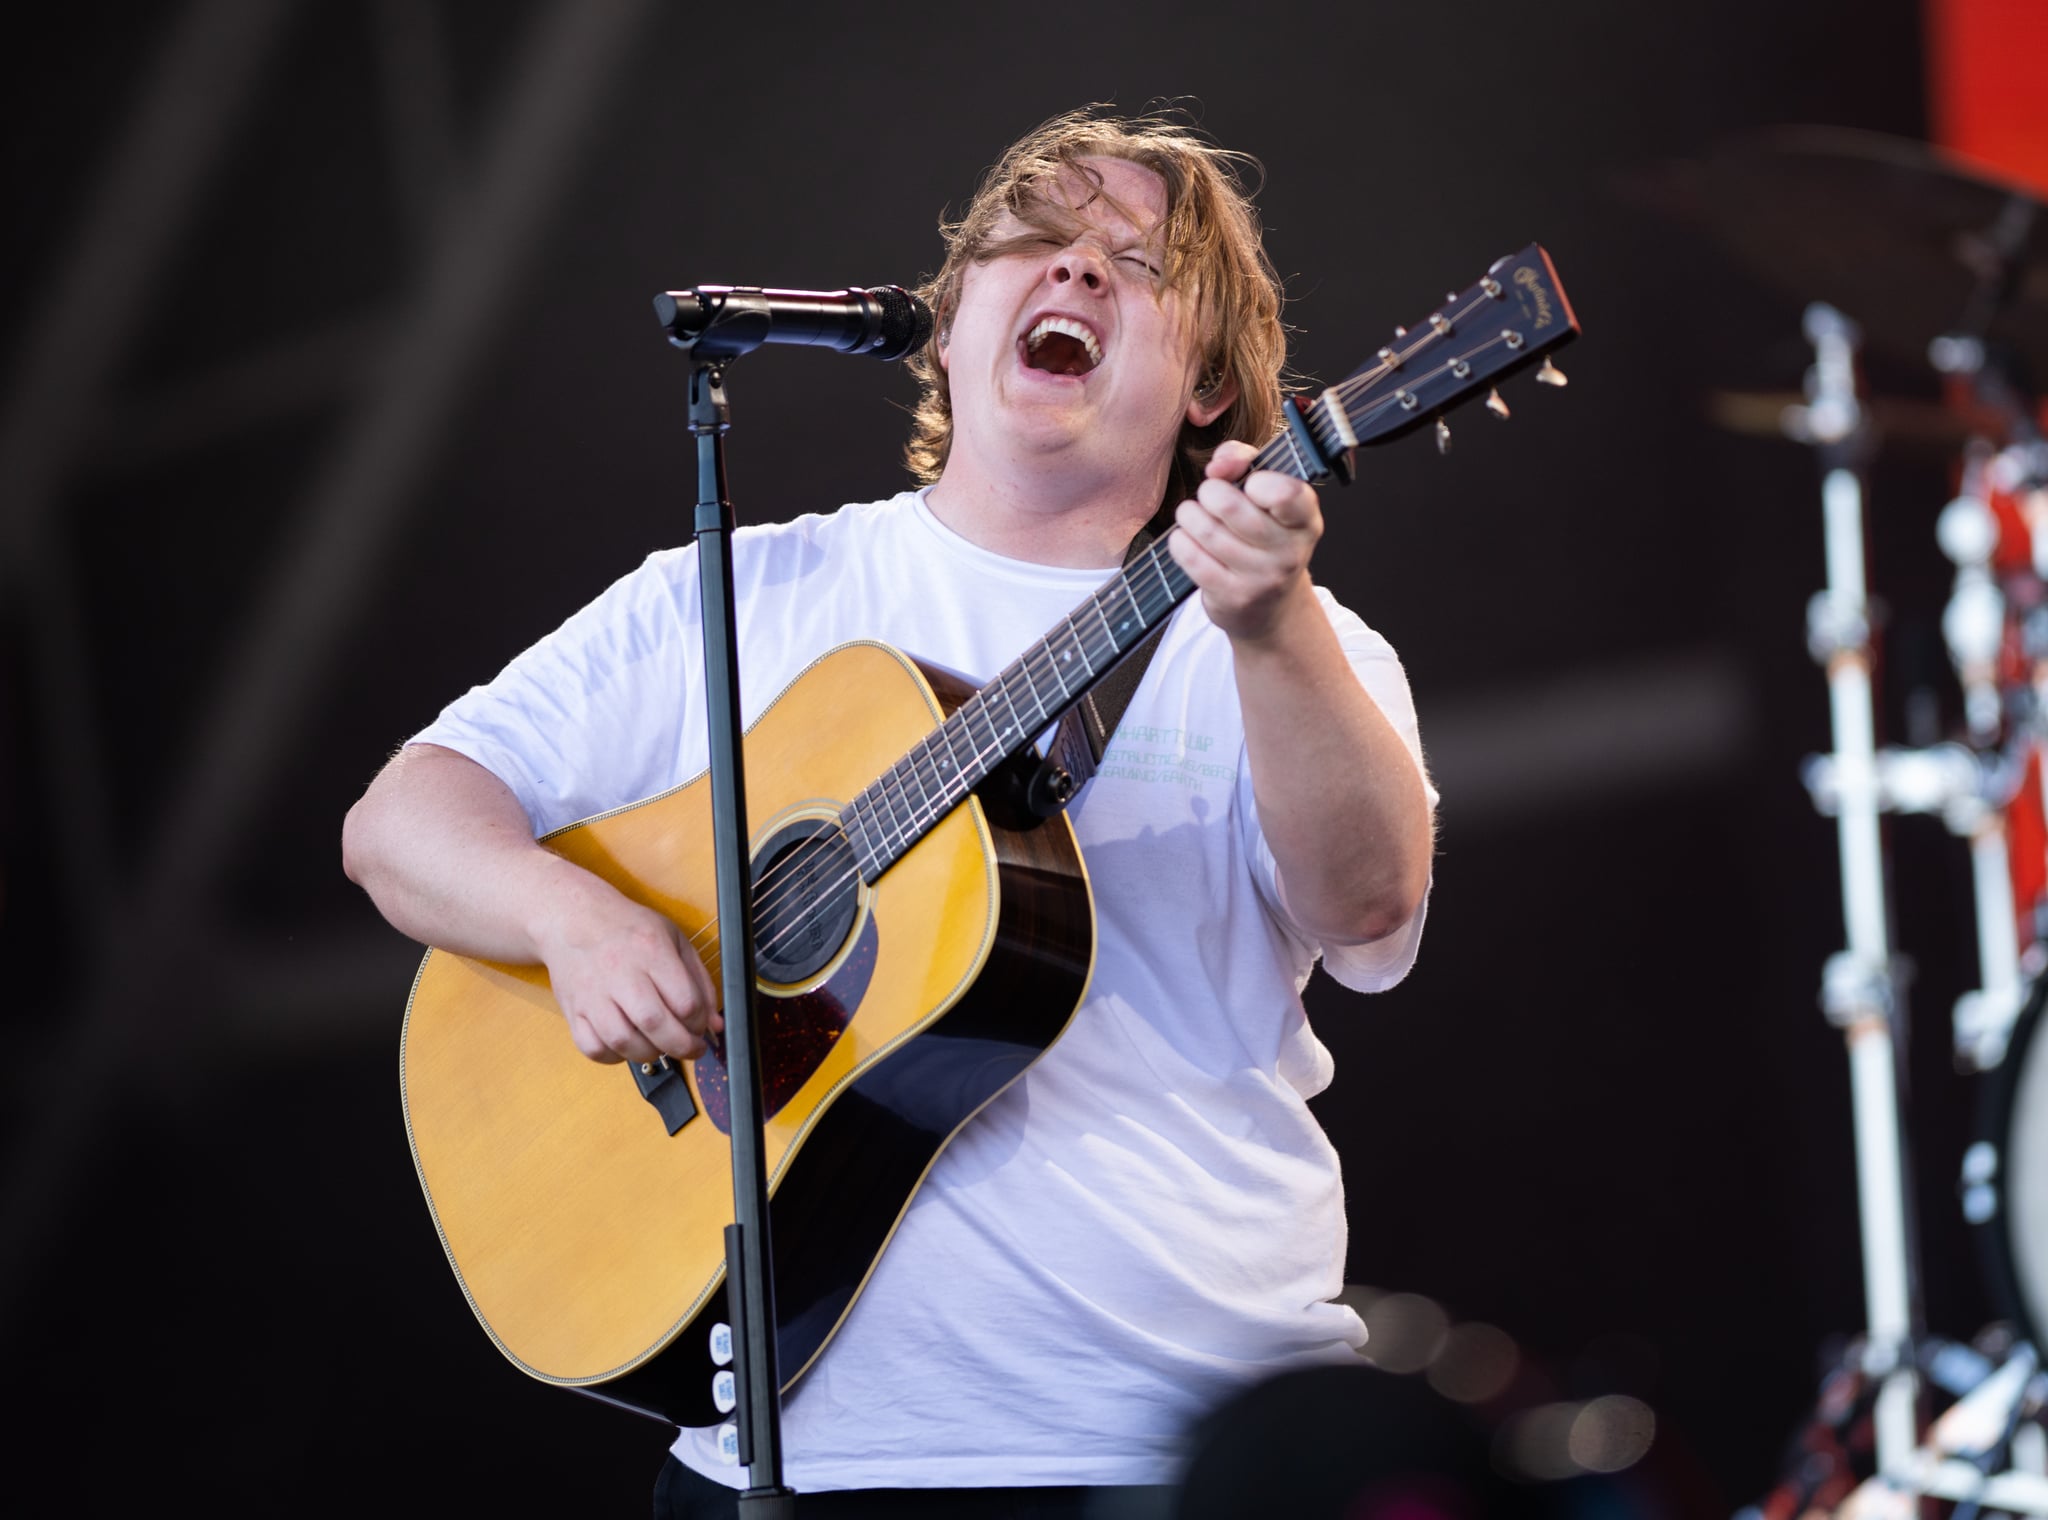 SOMERSET - JUNE 24: Lewis Capaldi performs on the Pyramid Stage at Day 4 of Glastonbury Festival 2023 on June 24, 2023 in Somerset, United Kingdom. (Photo by Samir Hussein/WireImage)